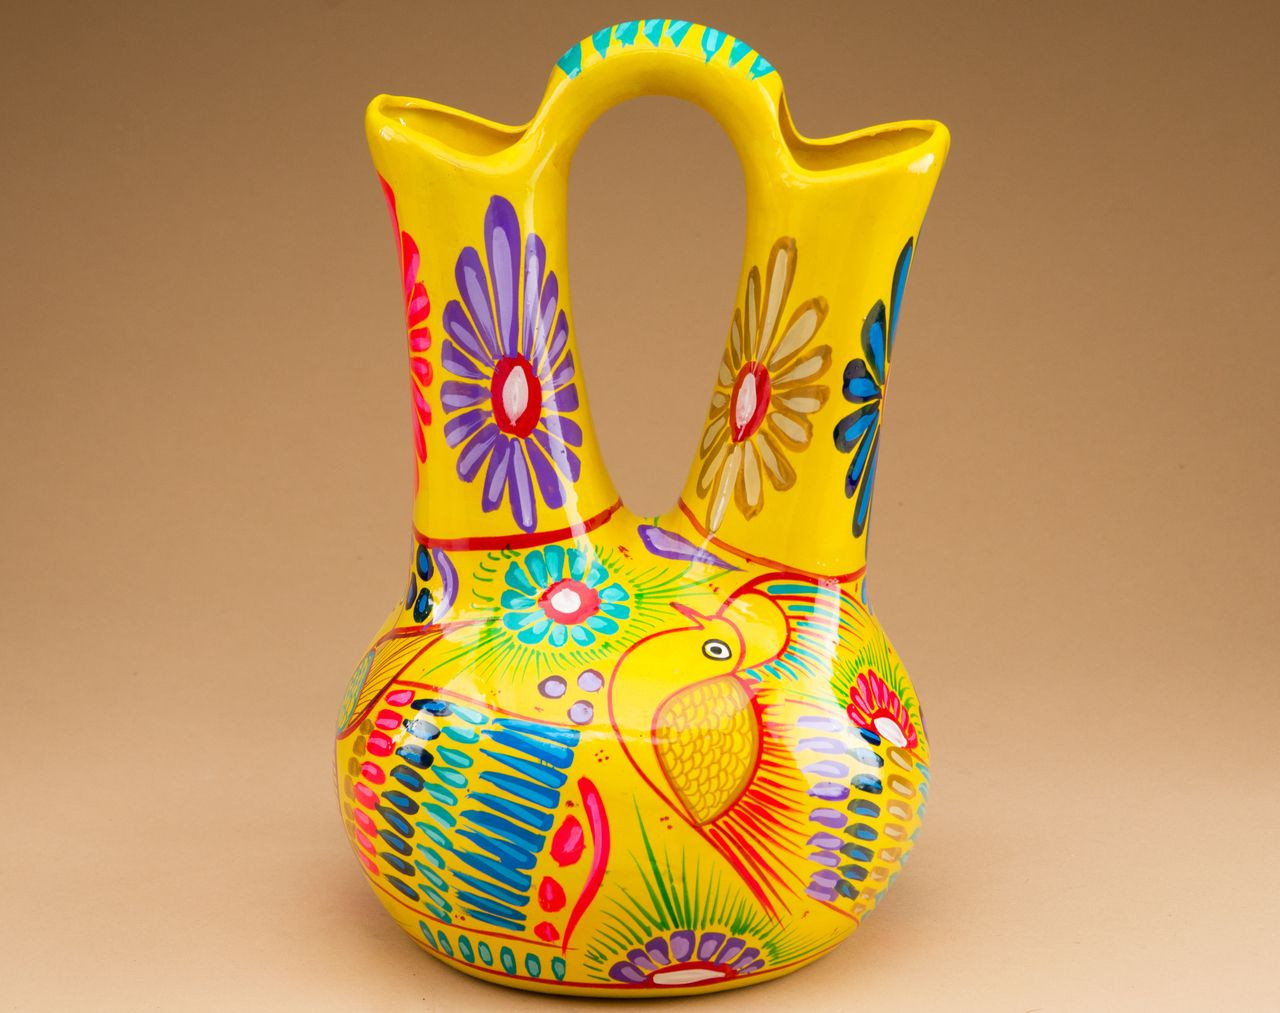 mexican talavera vases of southwest talavera pottery wedding vase 11 p362 pinterest pertaining to hand painted southwest talavera wedding vases are one of the outstanding ceramics of southern mexico with intricate floral patterns and brilliant colors